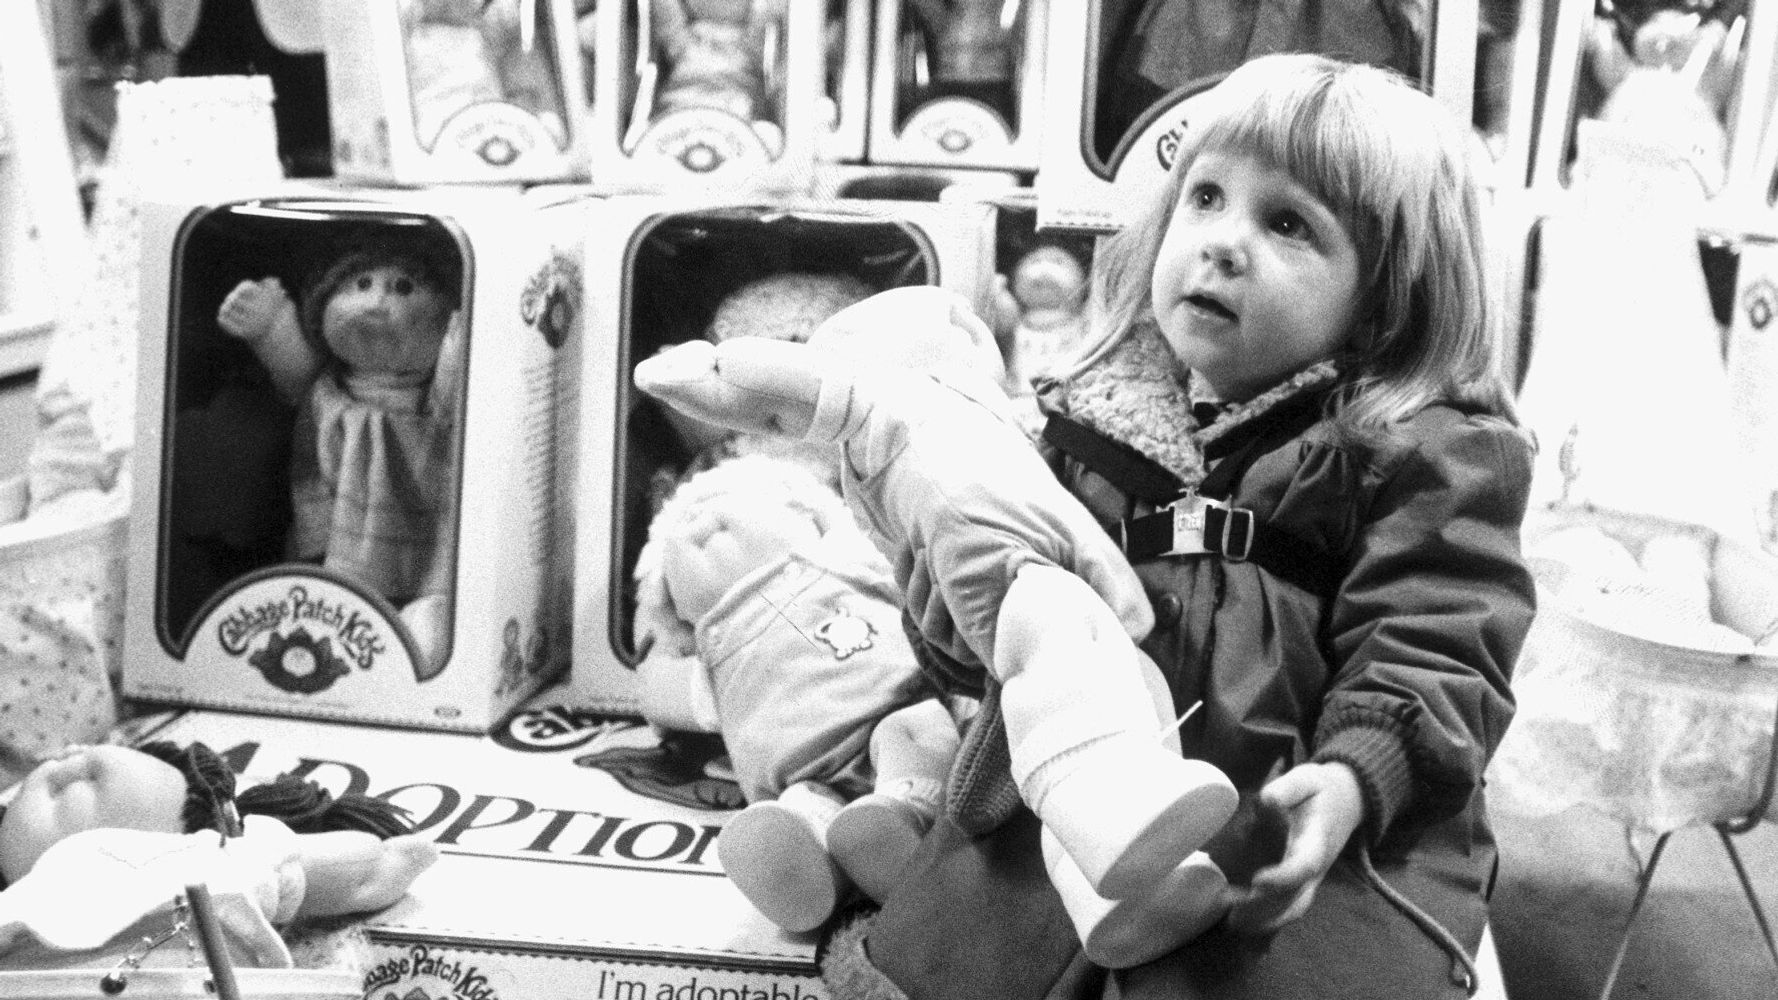 Toy Craze 2016 Flashback To All The Other Toy Riots Of Christmas Past